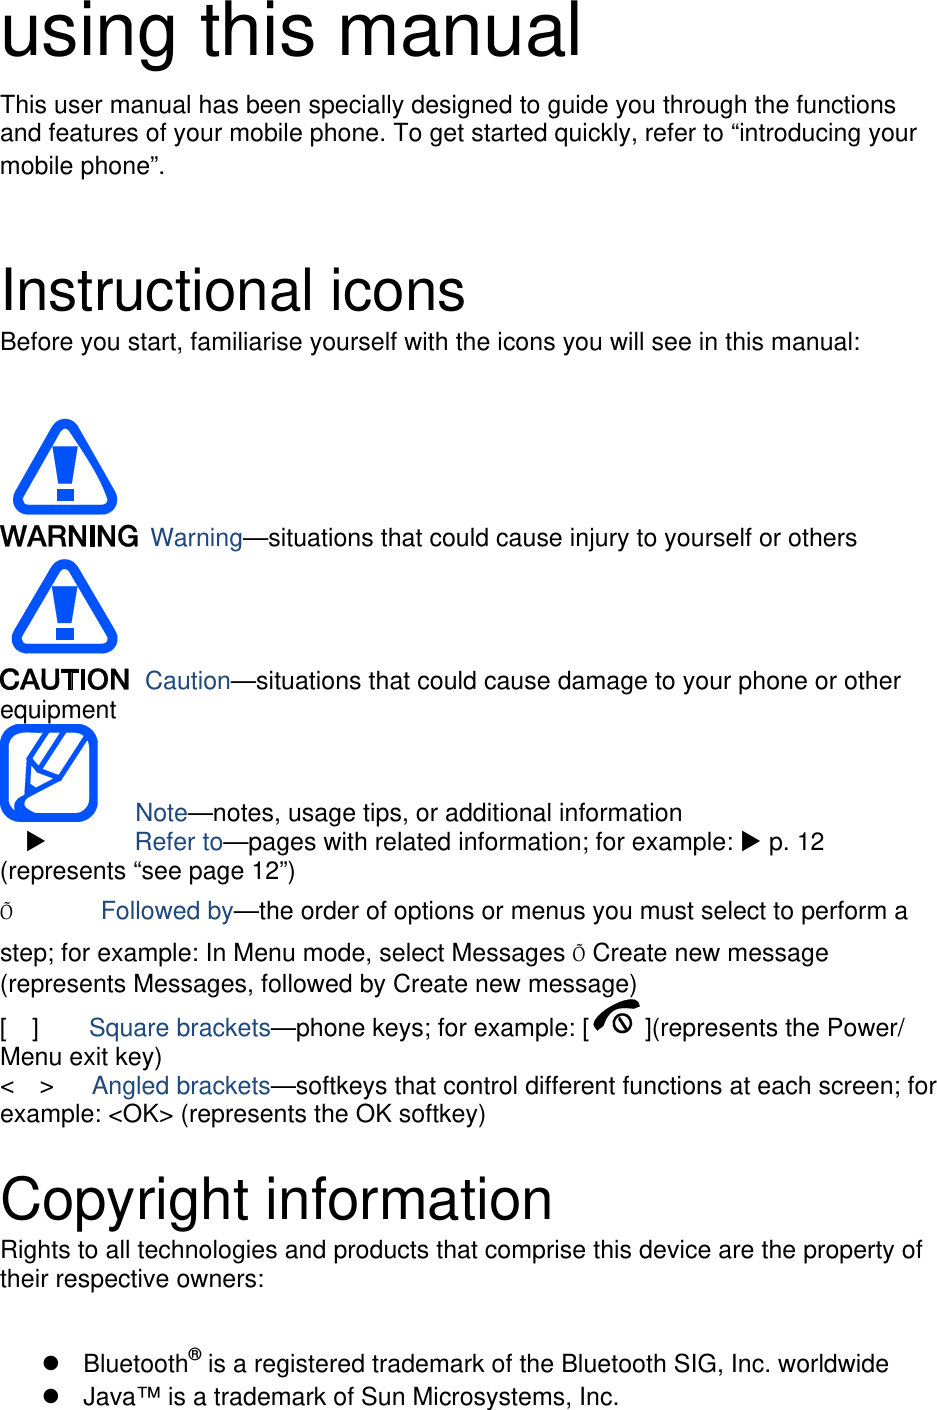 using this manual This user manual has been specially designed to guide you through the functions and features of your mobile phone. To get started quickly, refer to “introducing your mobile phone”.   Instructional icons Before you start, familiarise yourself with the icons you will see in this manual:     Warning—situations that could cause injury to yourself or others  Caution—situations that could cause damage to your phone or other equipment    Note—notes, usage tips, or additional information   X       Refer to—pages with related information; for example: X p. 12 (represents “see page 12”) Õ       Followed by—the order of options or menus you must select to perform a step; for example: In Menu mode, select Messages Õ Create new message (represents Messages, followed by Create new message) [  ]    Square brackets—phone keys; for example: [ ](represents the Power/ Menu exit key) &lt;  &gt;   Angled brackets—softkeys that control different functions at each screen; for example: &lt;OK&gt; (represents the OK softkey)  Copyright information Rights to all technologies and products that comprise this device are the property of their respective owners:  z Bluetooth® is a registered trademark of the Bluetooth SIG, Inc. worldwide z  Java™ is a trademark of Sun Microsystems, Inc. 